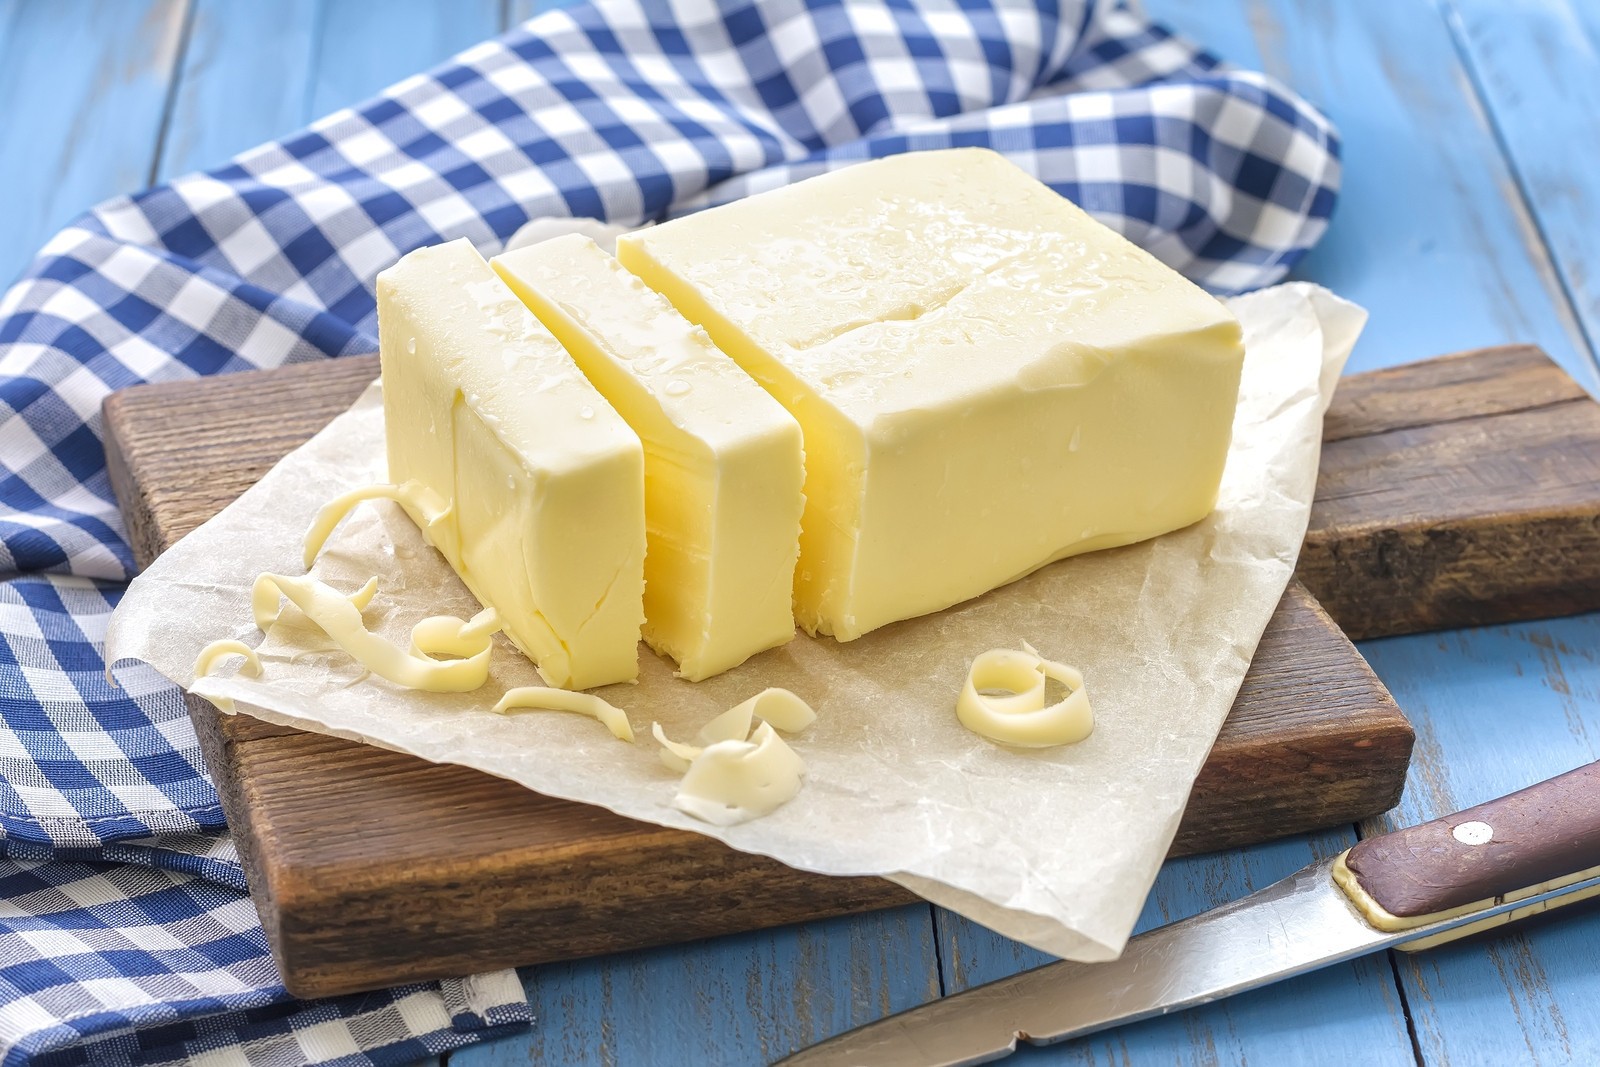 Azerbaijan posts 13% decline in expenses on butter imports